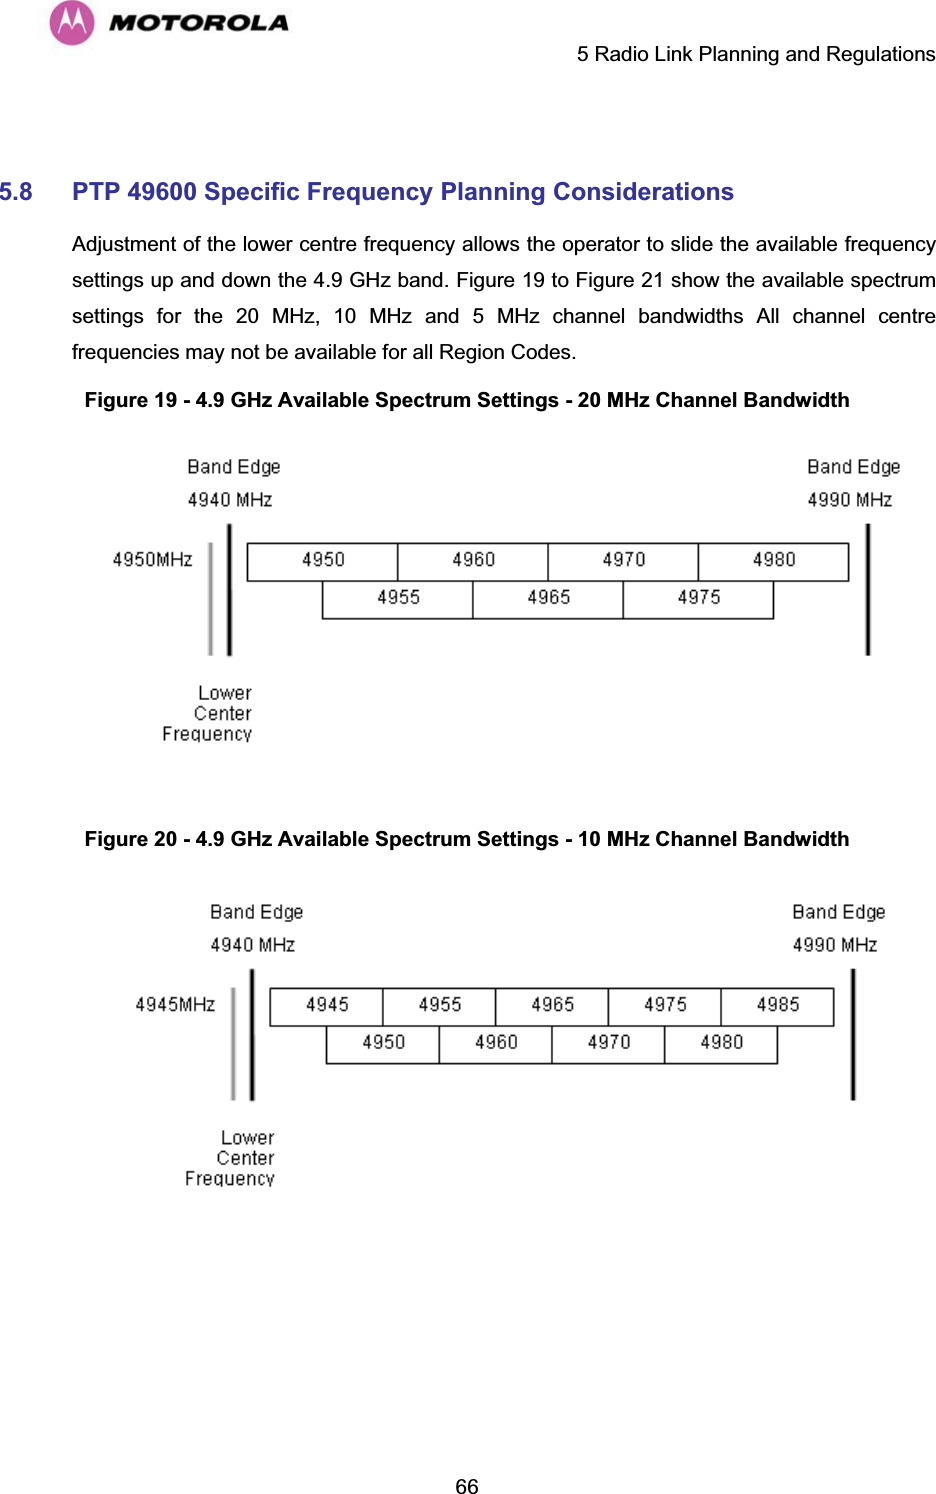     5 Radio Link Planning and Regulations  66 5.8 PTP 49600 Specific Frequency Planning Considerations Adjustment of the lower centre frequency allows the operator to slide the available frequency settings up and down the 4.9 GHz band. Figure 19 to Figure 21 show the available spectrum settings for the 20 MHz, 10 MHz and 5 MHz channel bandwidths All channel centre frequencies may not be available for all Region Codes. Figure 19 - 4.9 GHz Available Spectrum Settings - 20 MHz Channel Bandwidth   Figure 20 - 4.9 GHz Available Spectrum Settings - 10 MHz Channel Bandwidth   